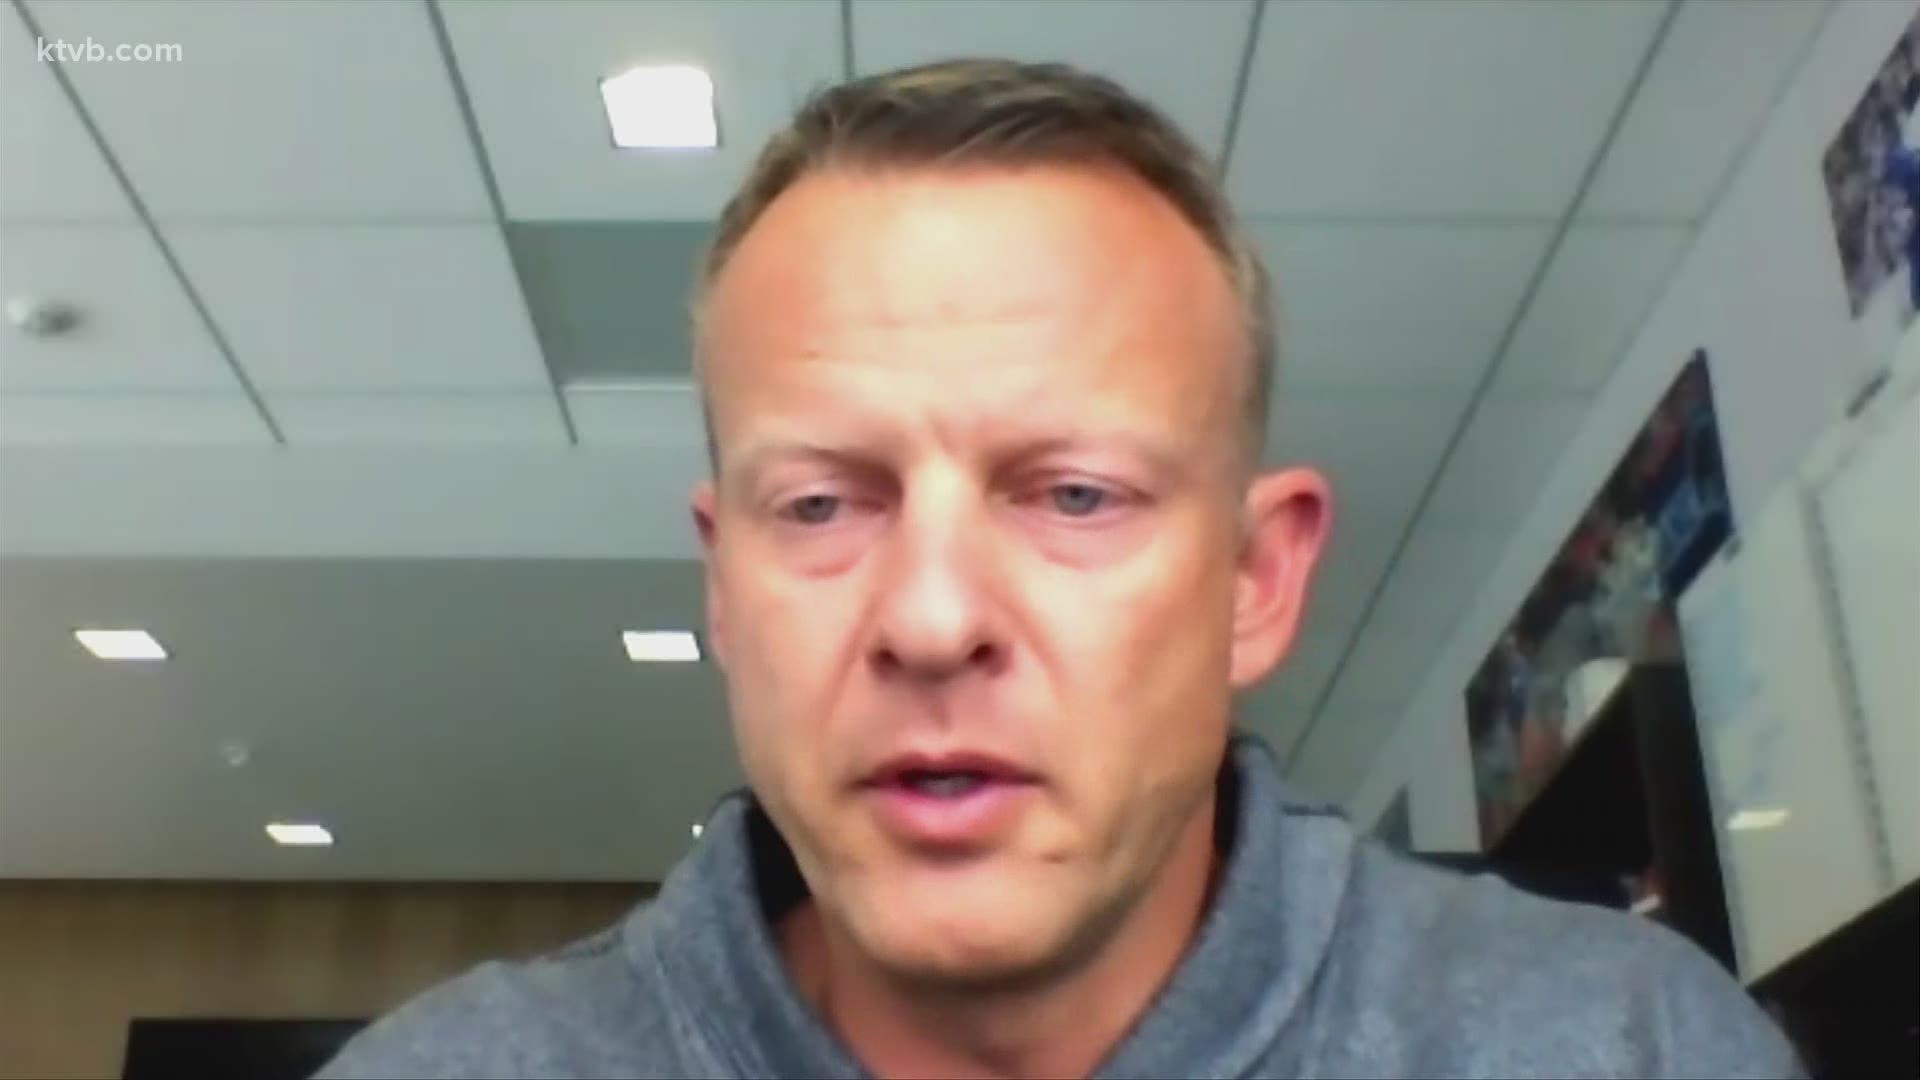 Coach Bryan Harsin reflects on what he has learned from difficult losses throughout his coaching career.